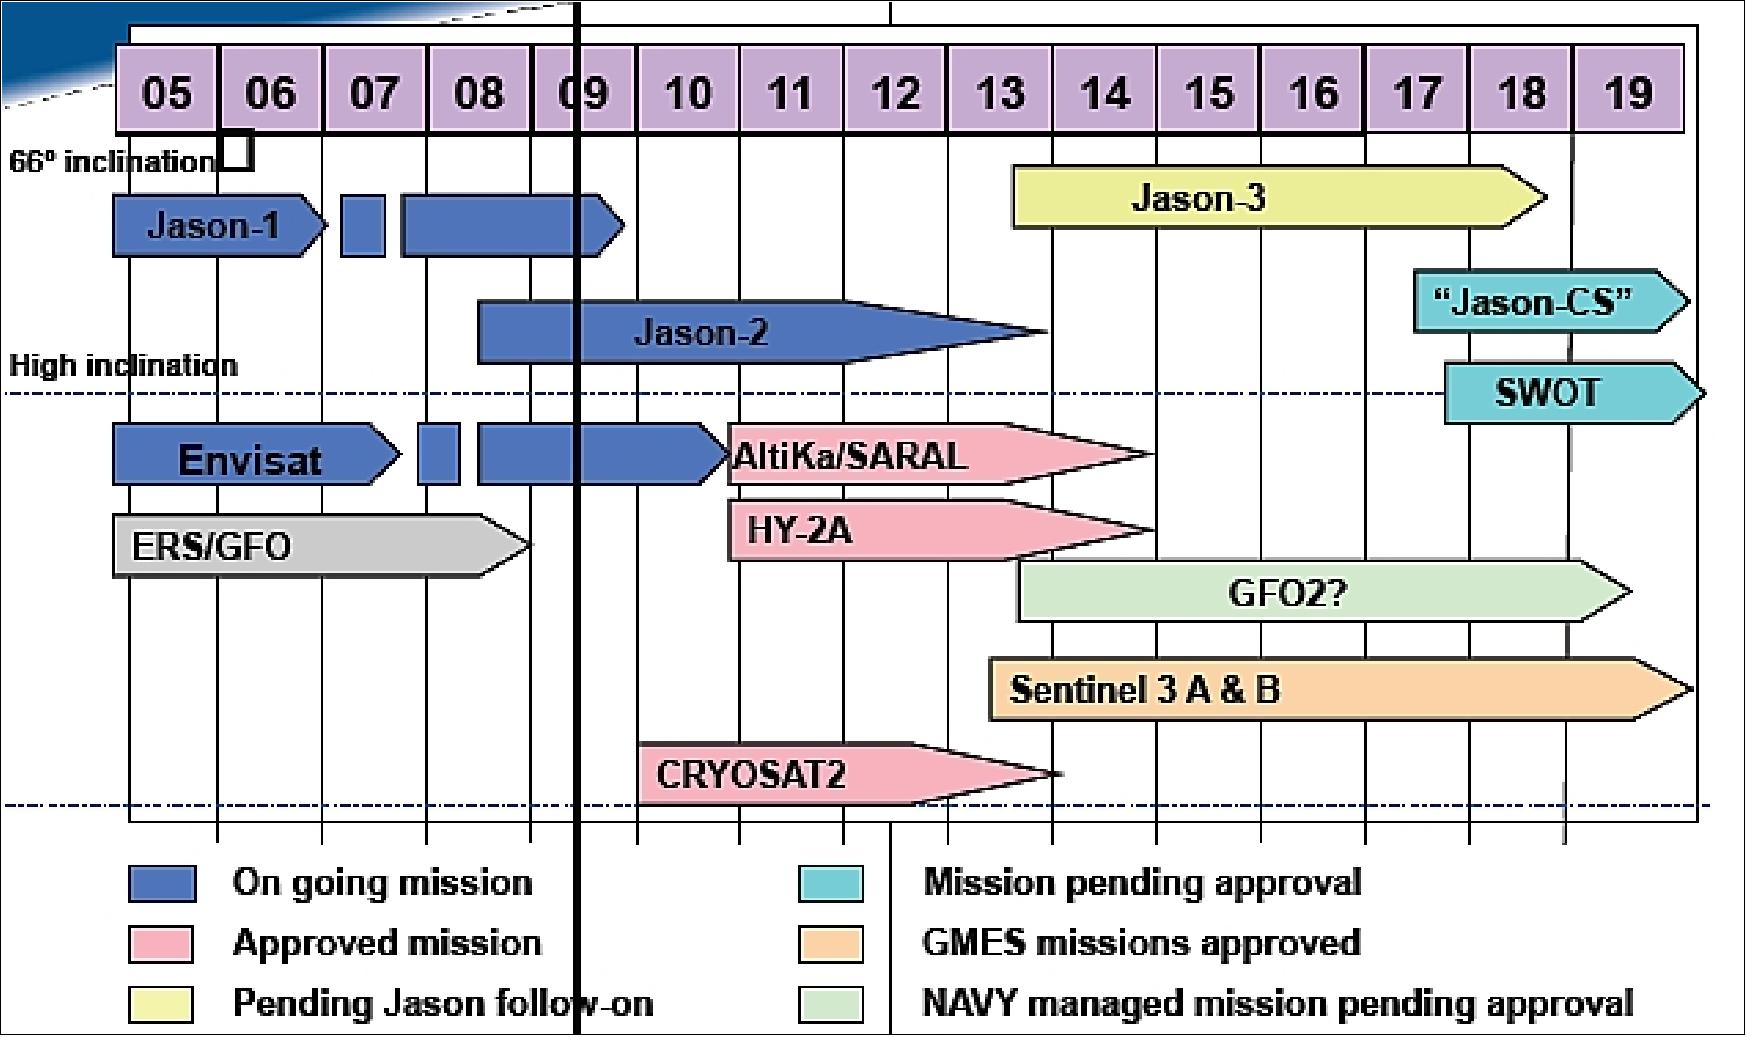 Figure 1: Overview of current (mid 2009) and future altimetry missions (image credit: CNES) 11)